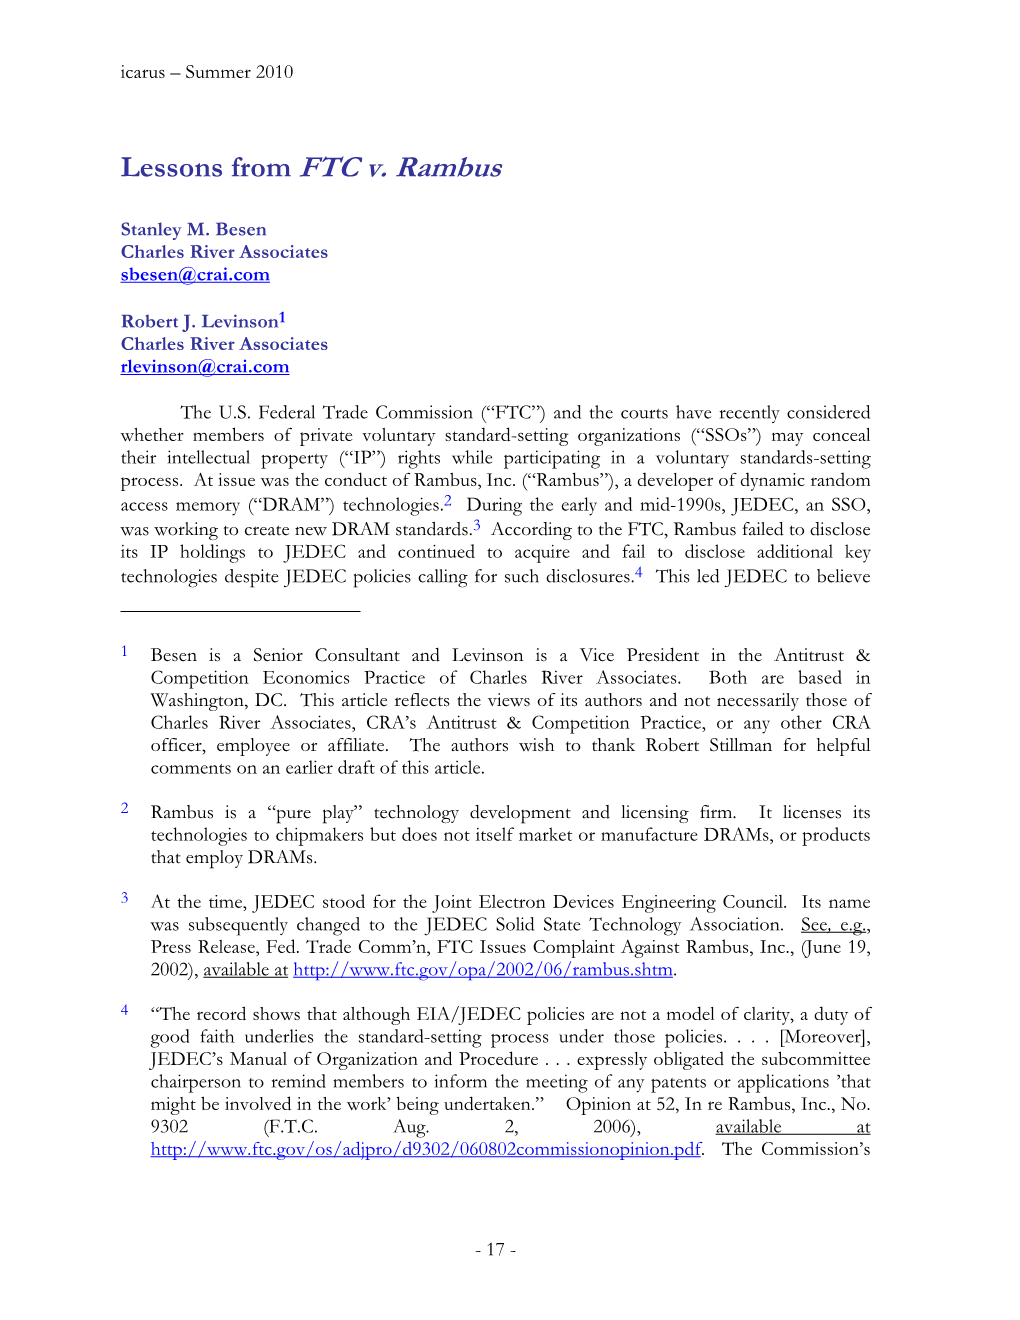 Lessons from FTC V. Rambus